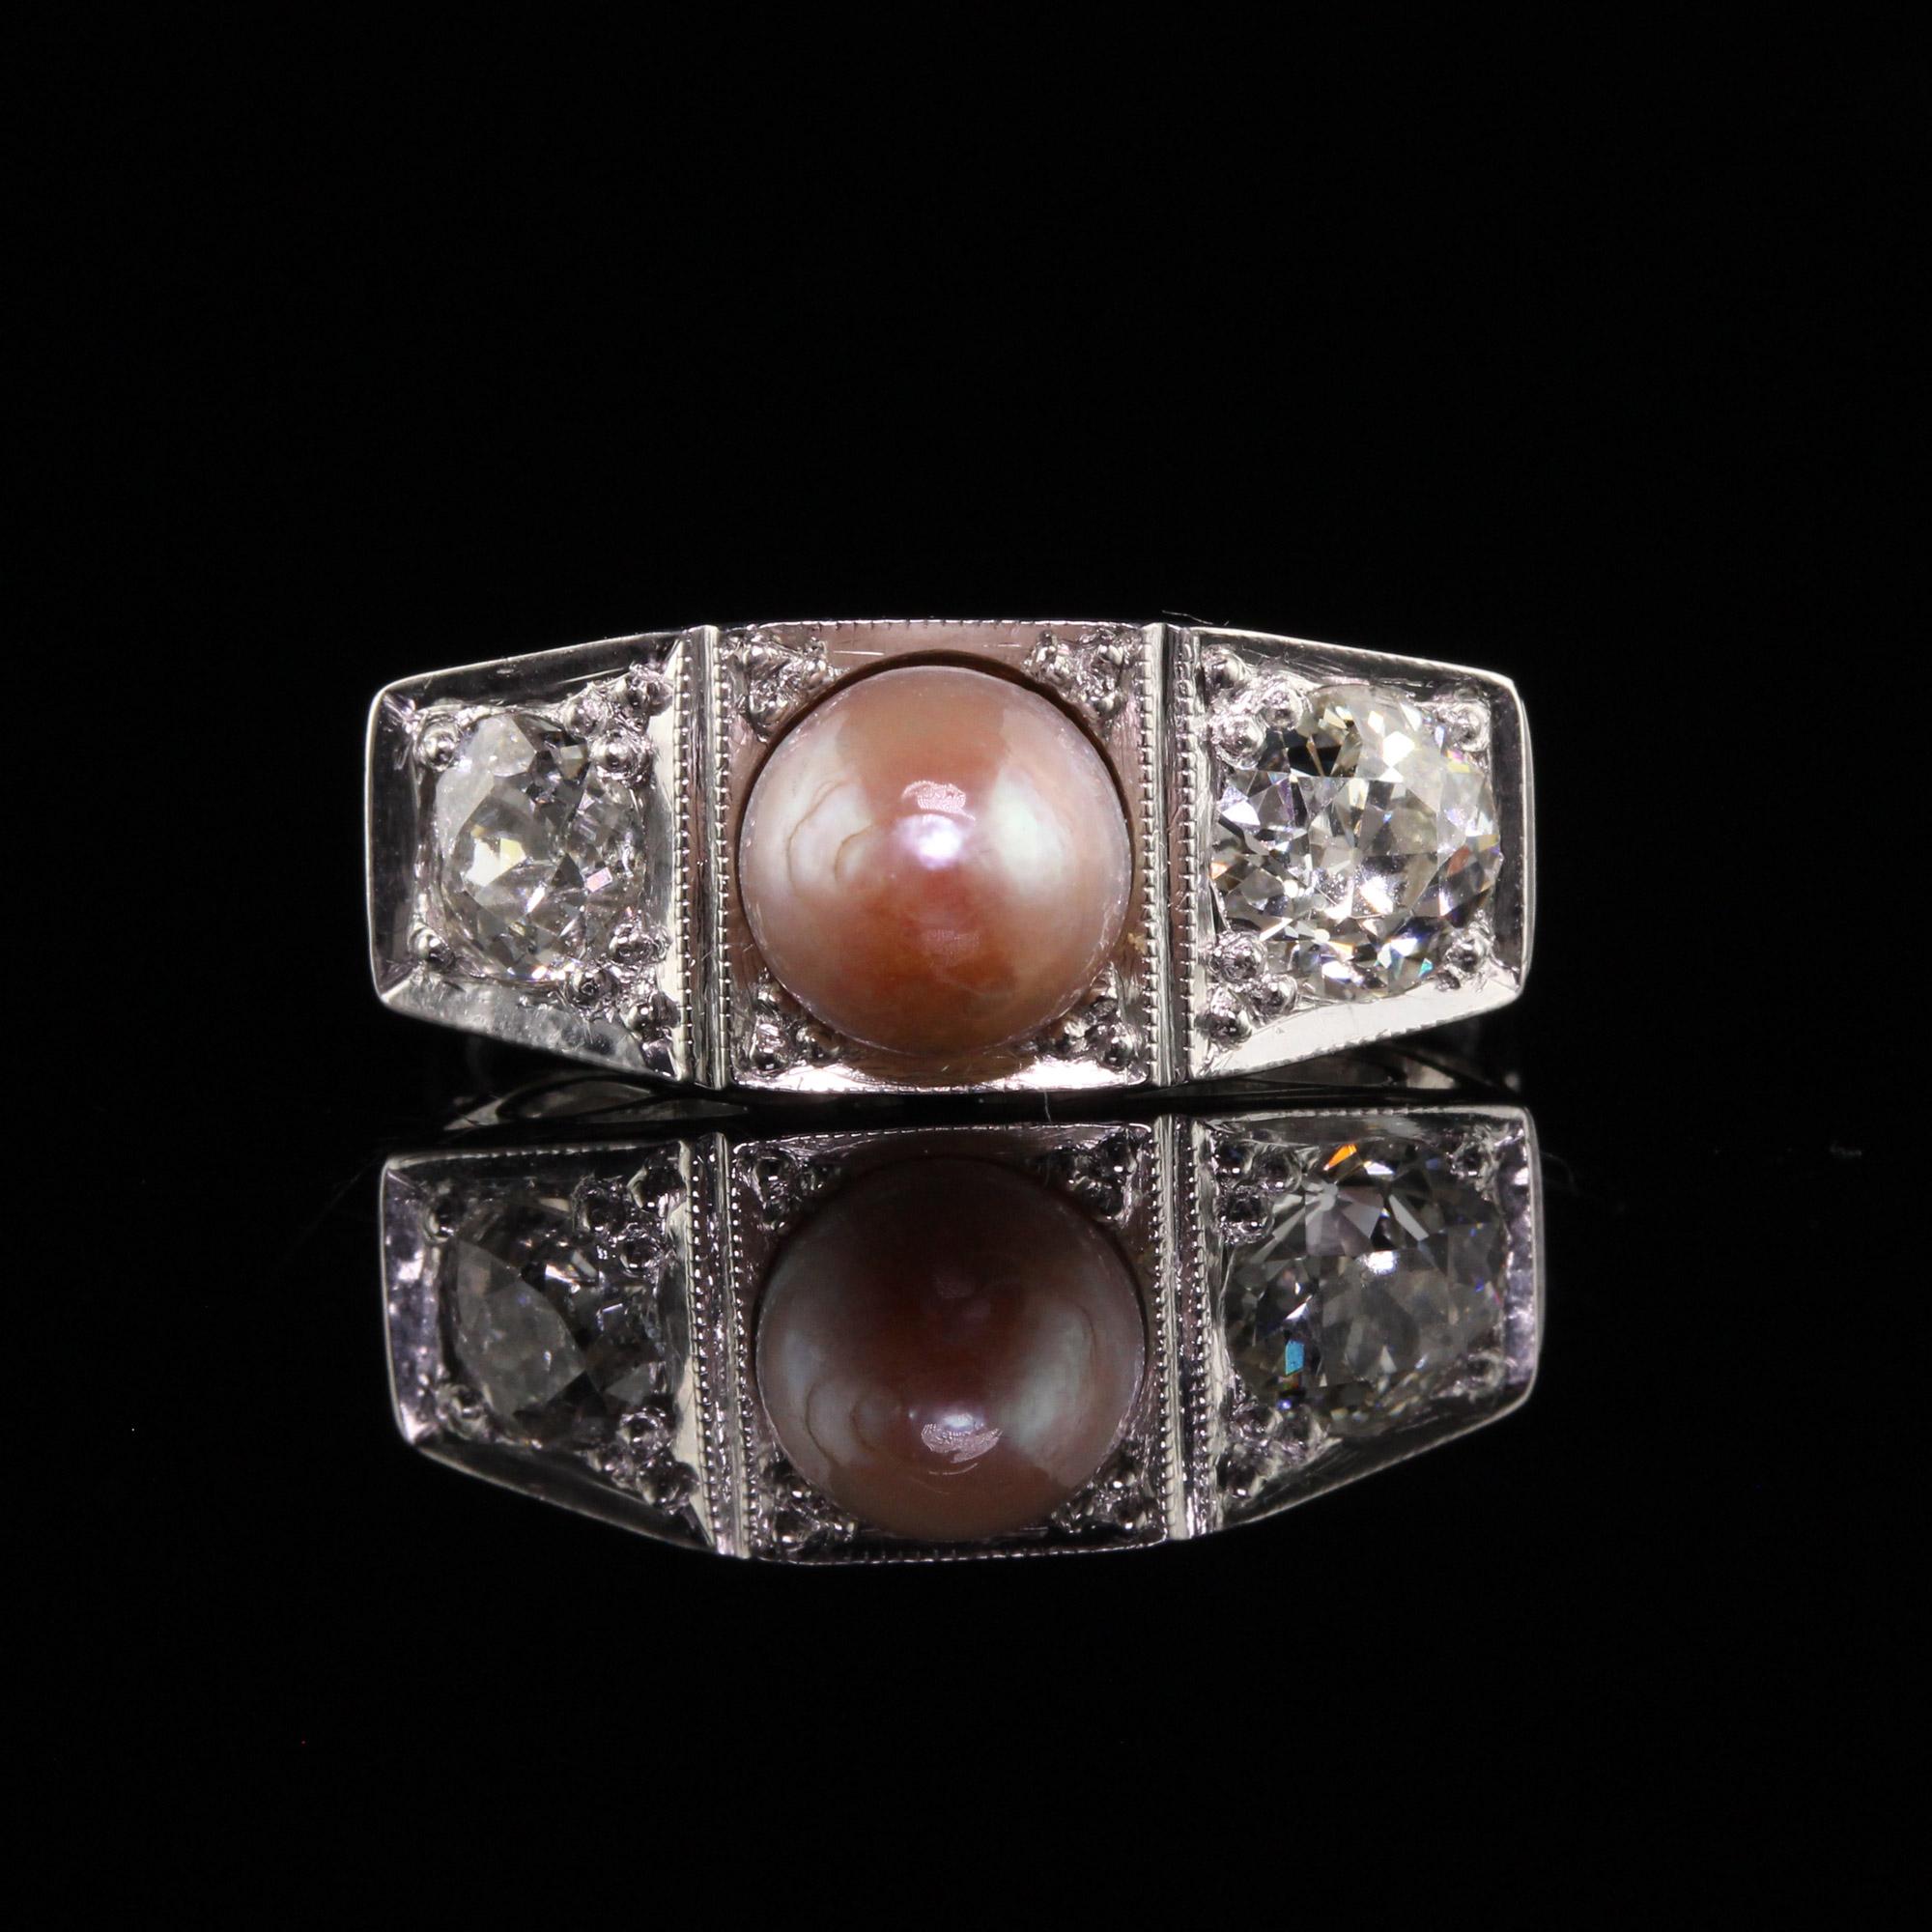 Antique Art Deco 14K White Gold Old European Diamond and Pearl Three Stone Ring In Good Condition For Sale In Great Neck, NY